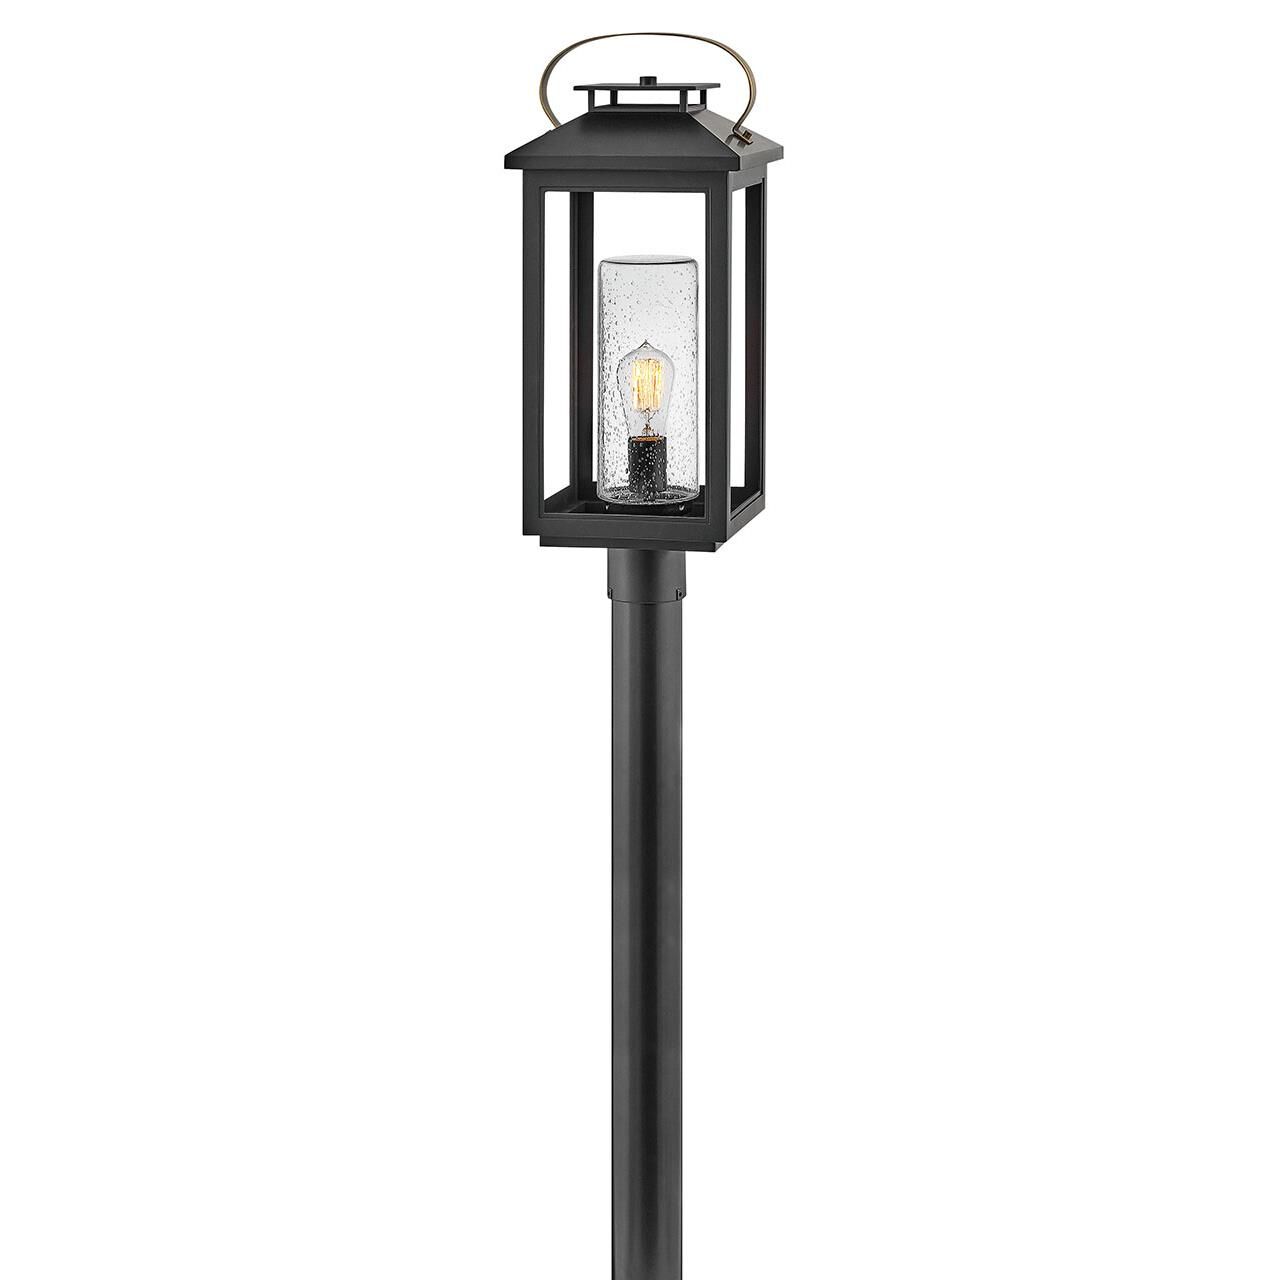 Photos - Floodlight / Street Light Hinkley Lighting Atwater 23 Inch Tall LED Outdoor Post Lamp Atwater - 1161 